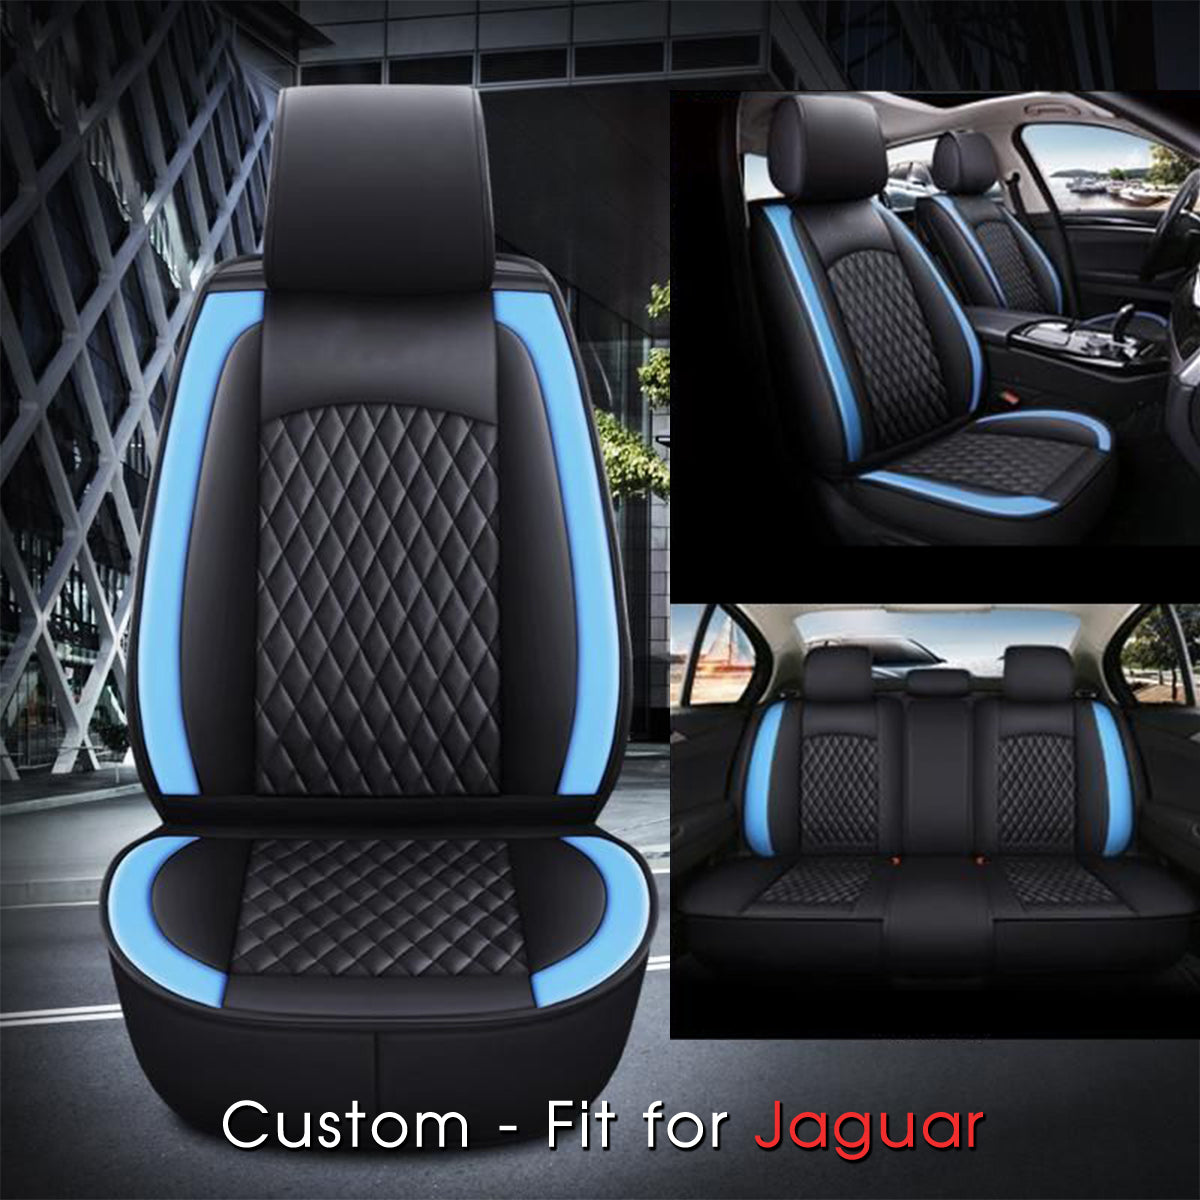 2 Car Seat Covers Full Set, Custom-Fit For Car, Waterproof Leather Front Rear Seat Automotive Protection Cushions, Car Accessories DLJG211